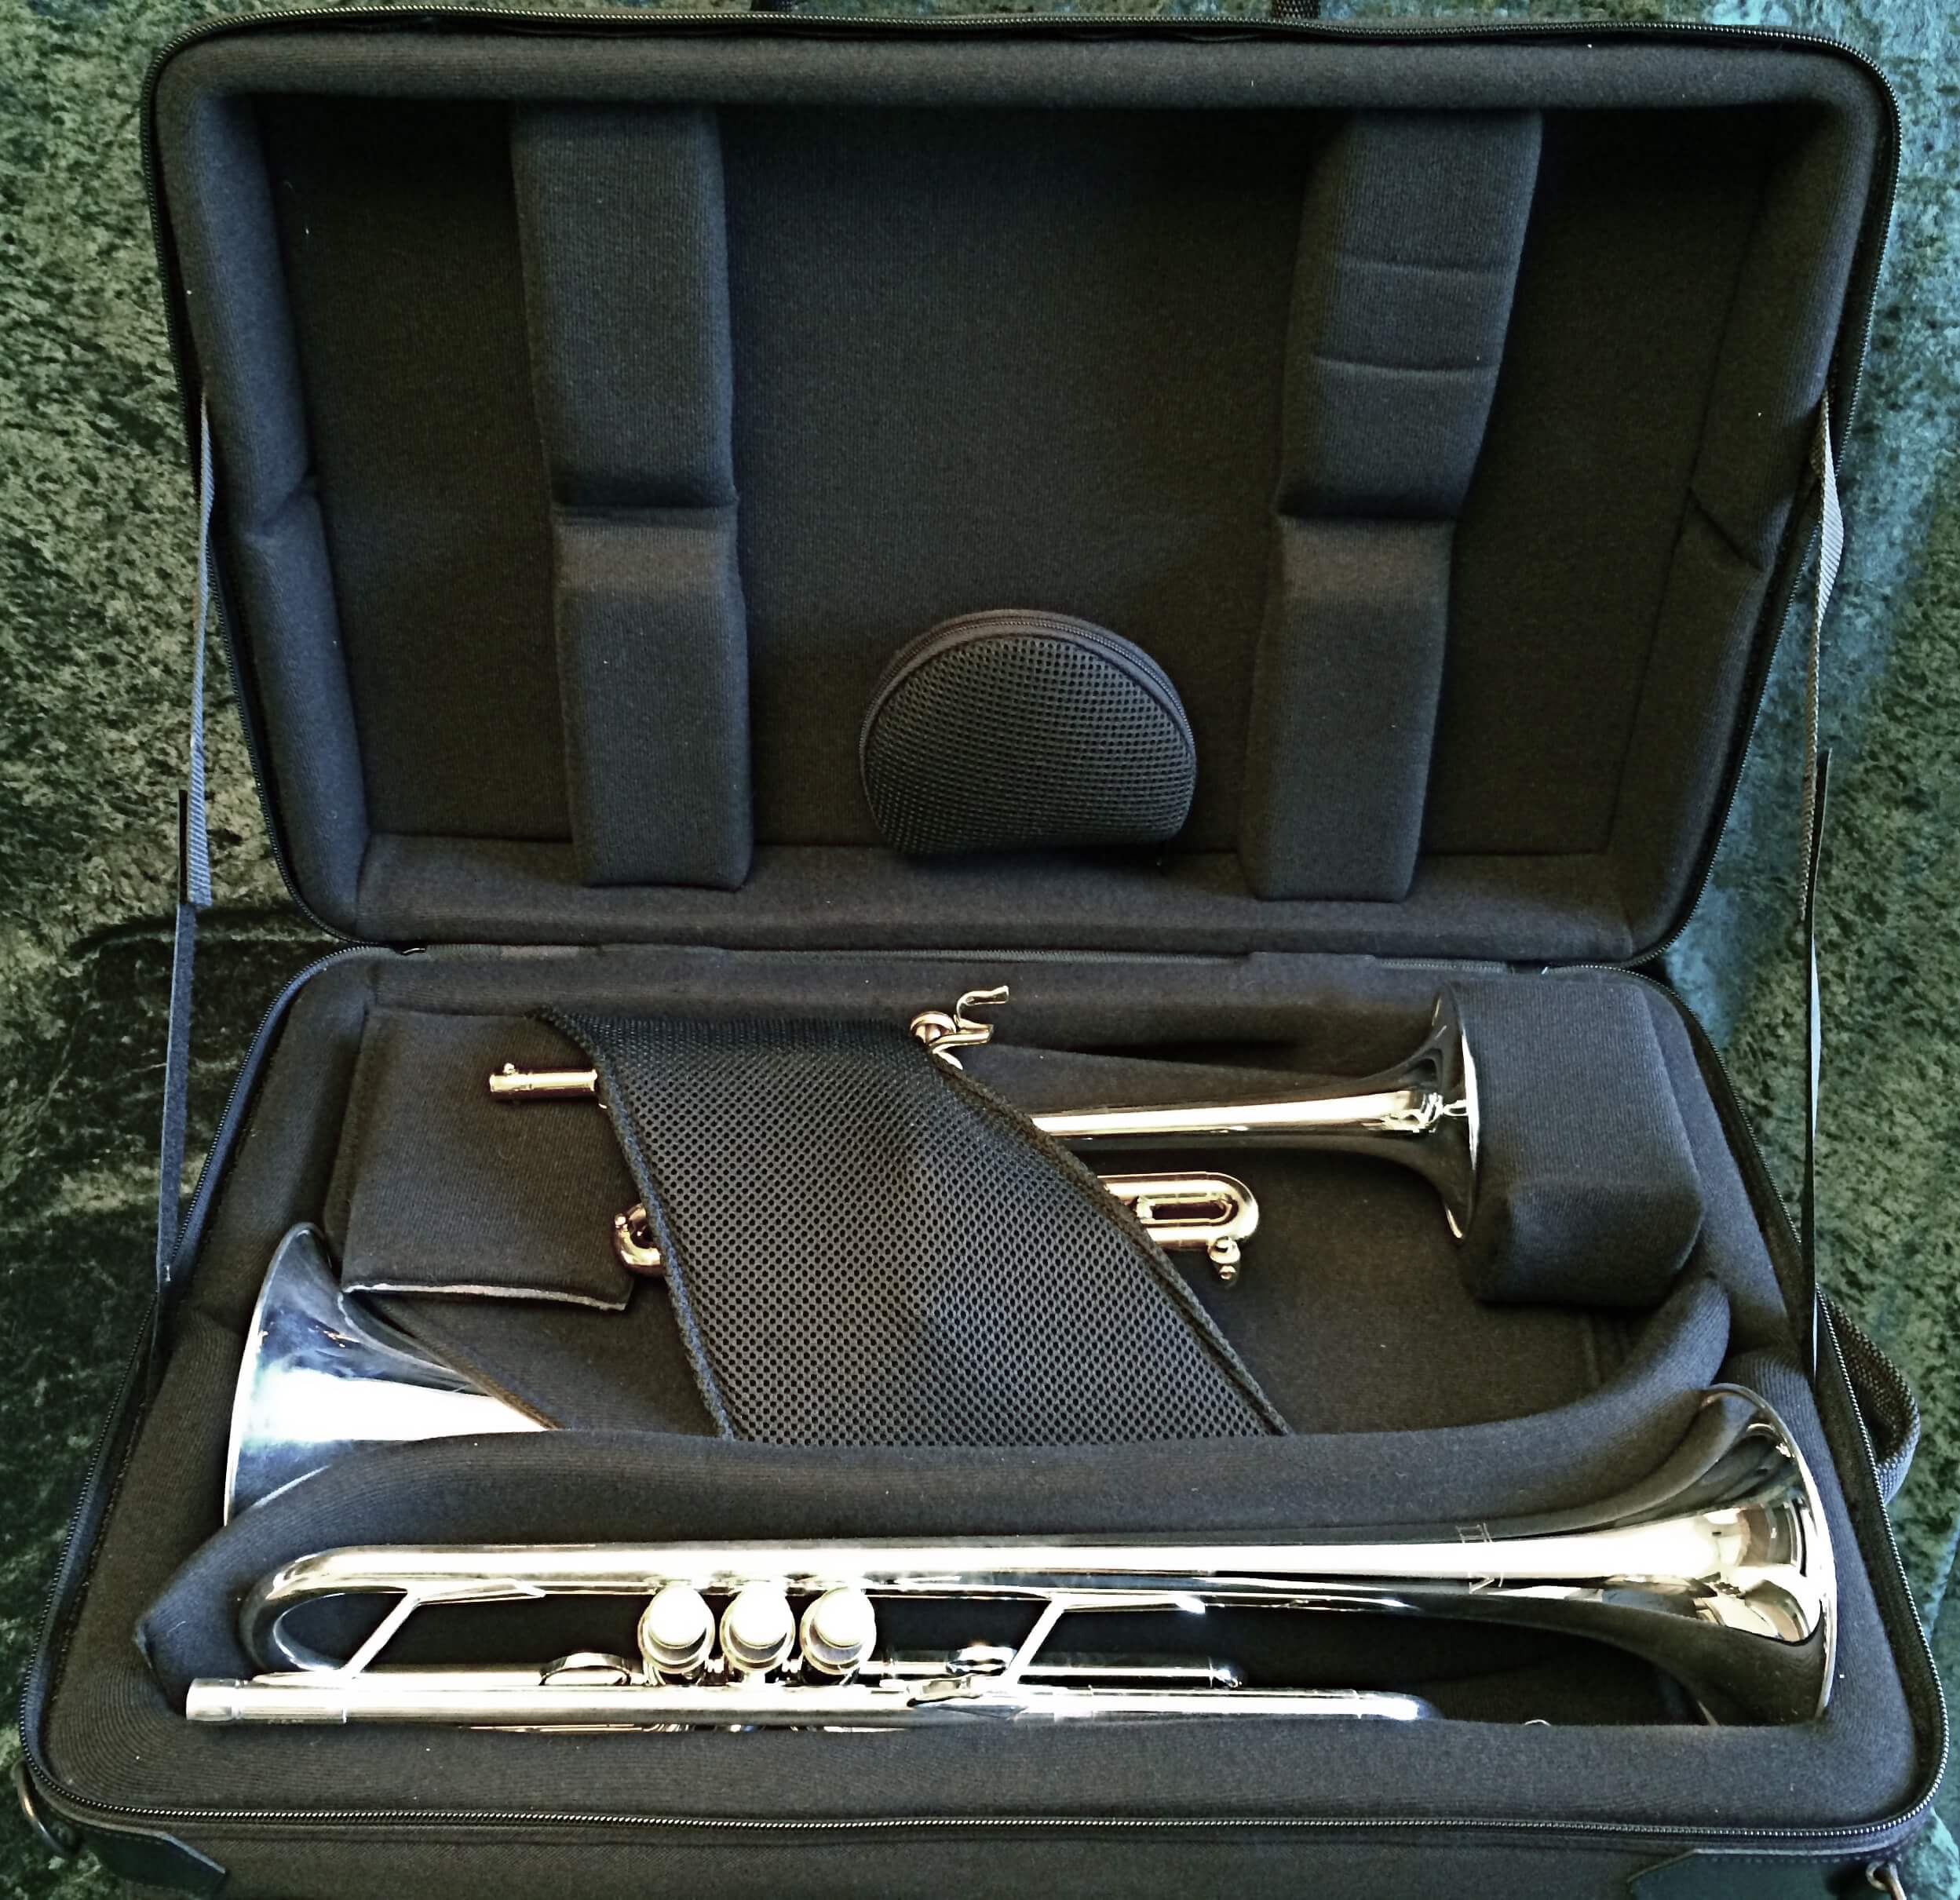 Best Deal for a Double Case on ! Double Trumpet Case Fits 2 trumpets 